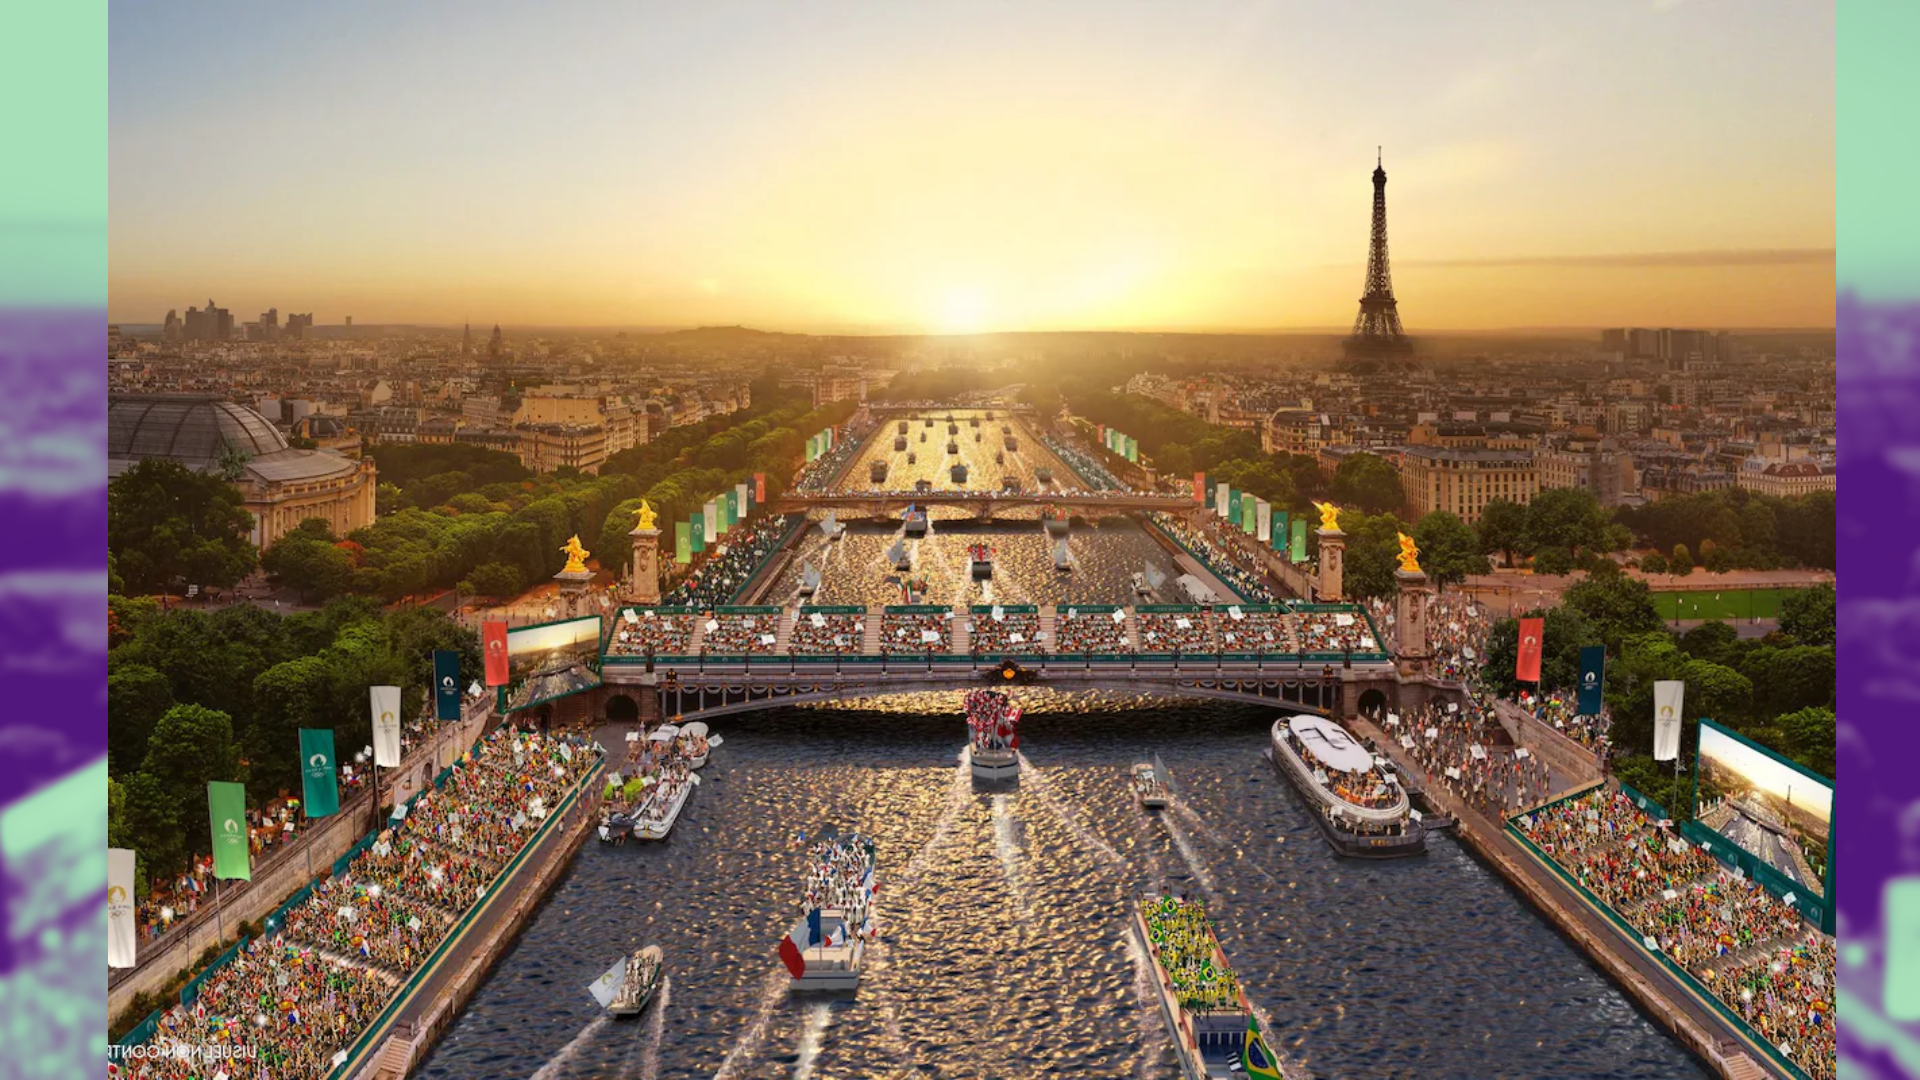 Paris Olympics 2024: Opening Ceremony, Timings, How to Watch, and Everything You Need to Know